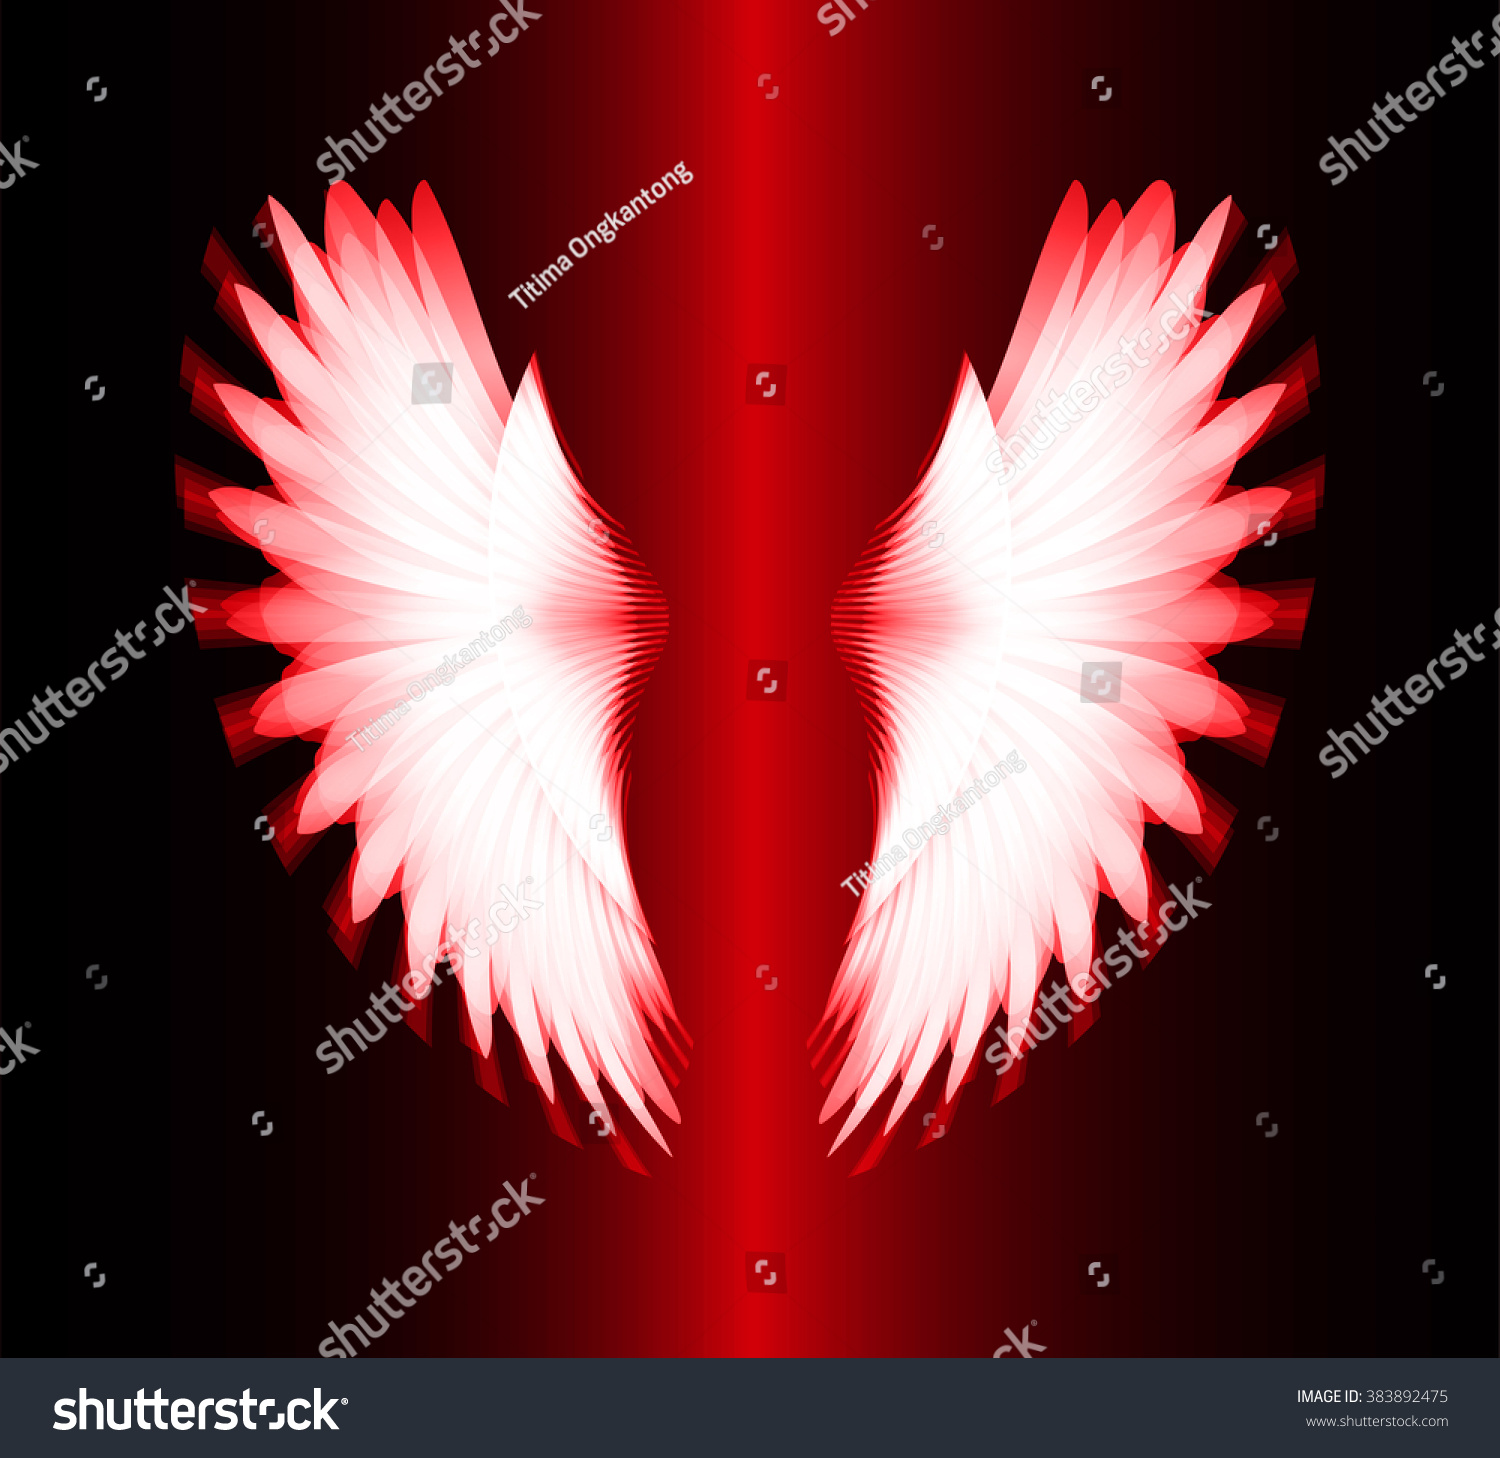 Red Glowing Stylized Angel Wings On Stock Vector (Royalty Free) 383892475